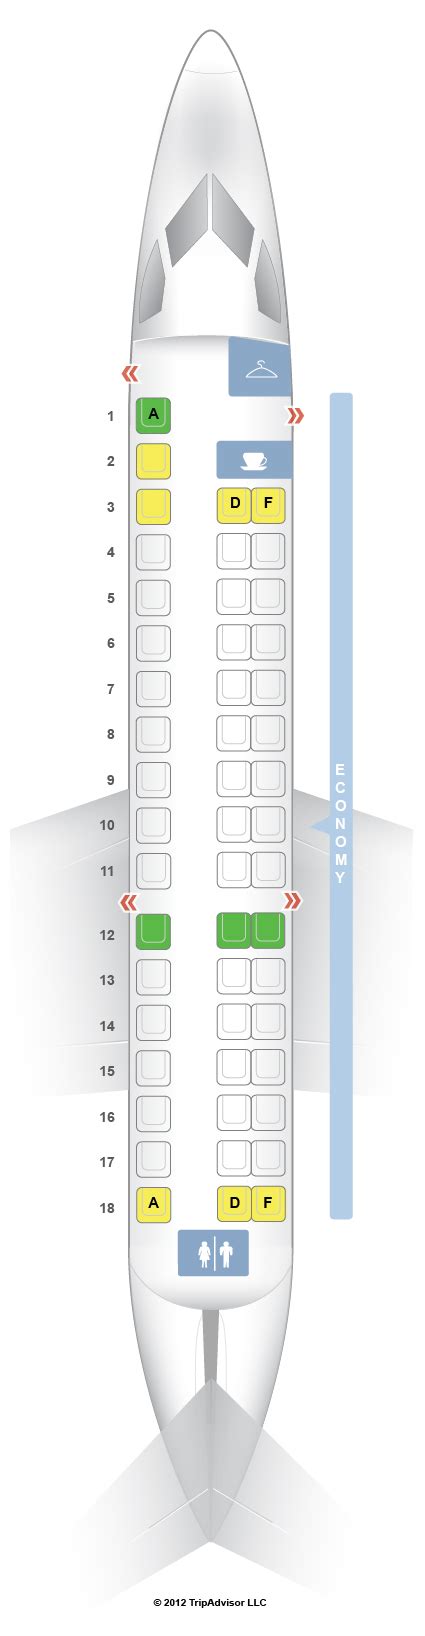 Erj 145 seat map. Delta's ERJ 145 is a small regional aircraft with a 1-2 cabin seating configuration. Seats on the left side of the plane are single seats, making 12A the best seat on the plane because of the added legroom in the exit row. Row 18 should be avoided at all costs as the lavatory door is right next to 18A and 18B, and the lavatory is effectively ... 